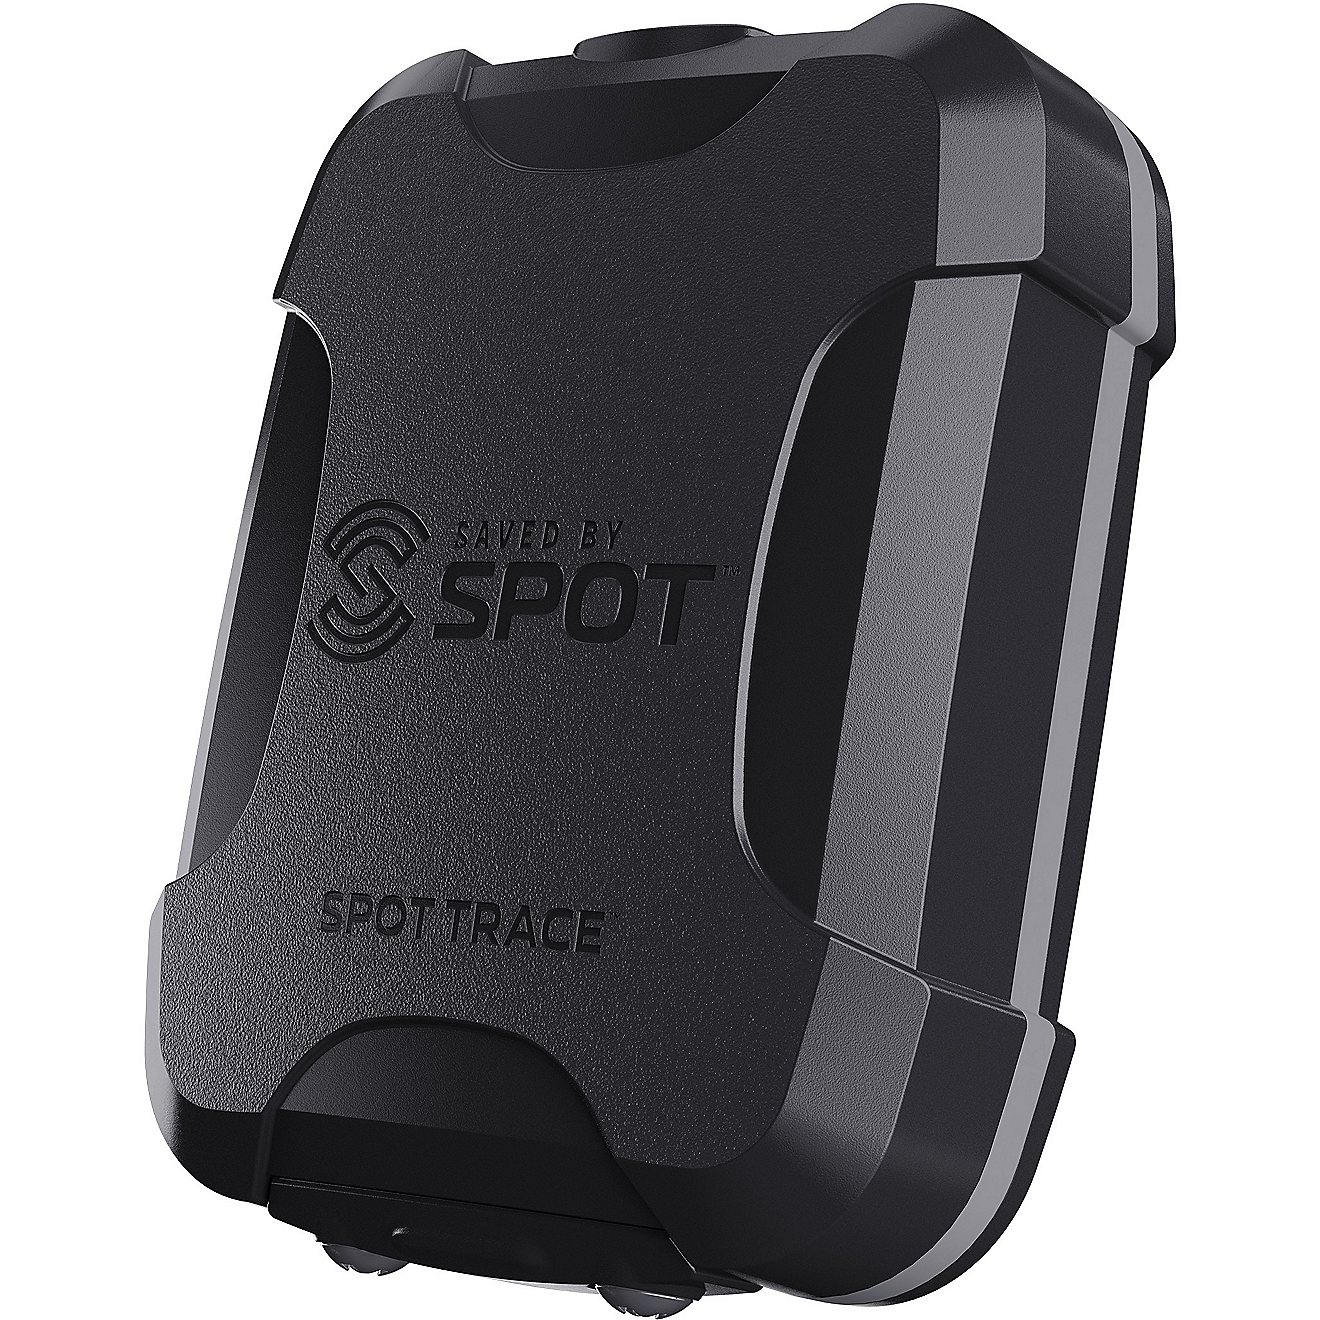 Spot Trace Theft Alert Satellite Tracking Device                                                                                 - view number 2